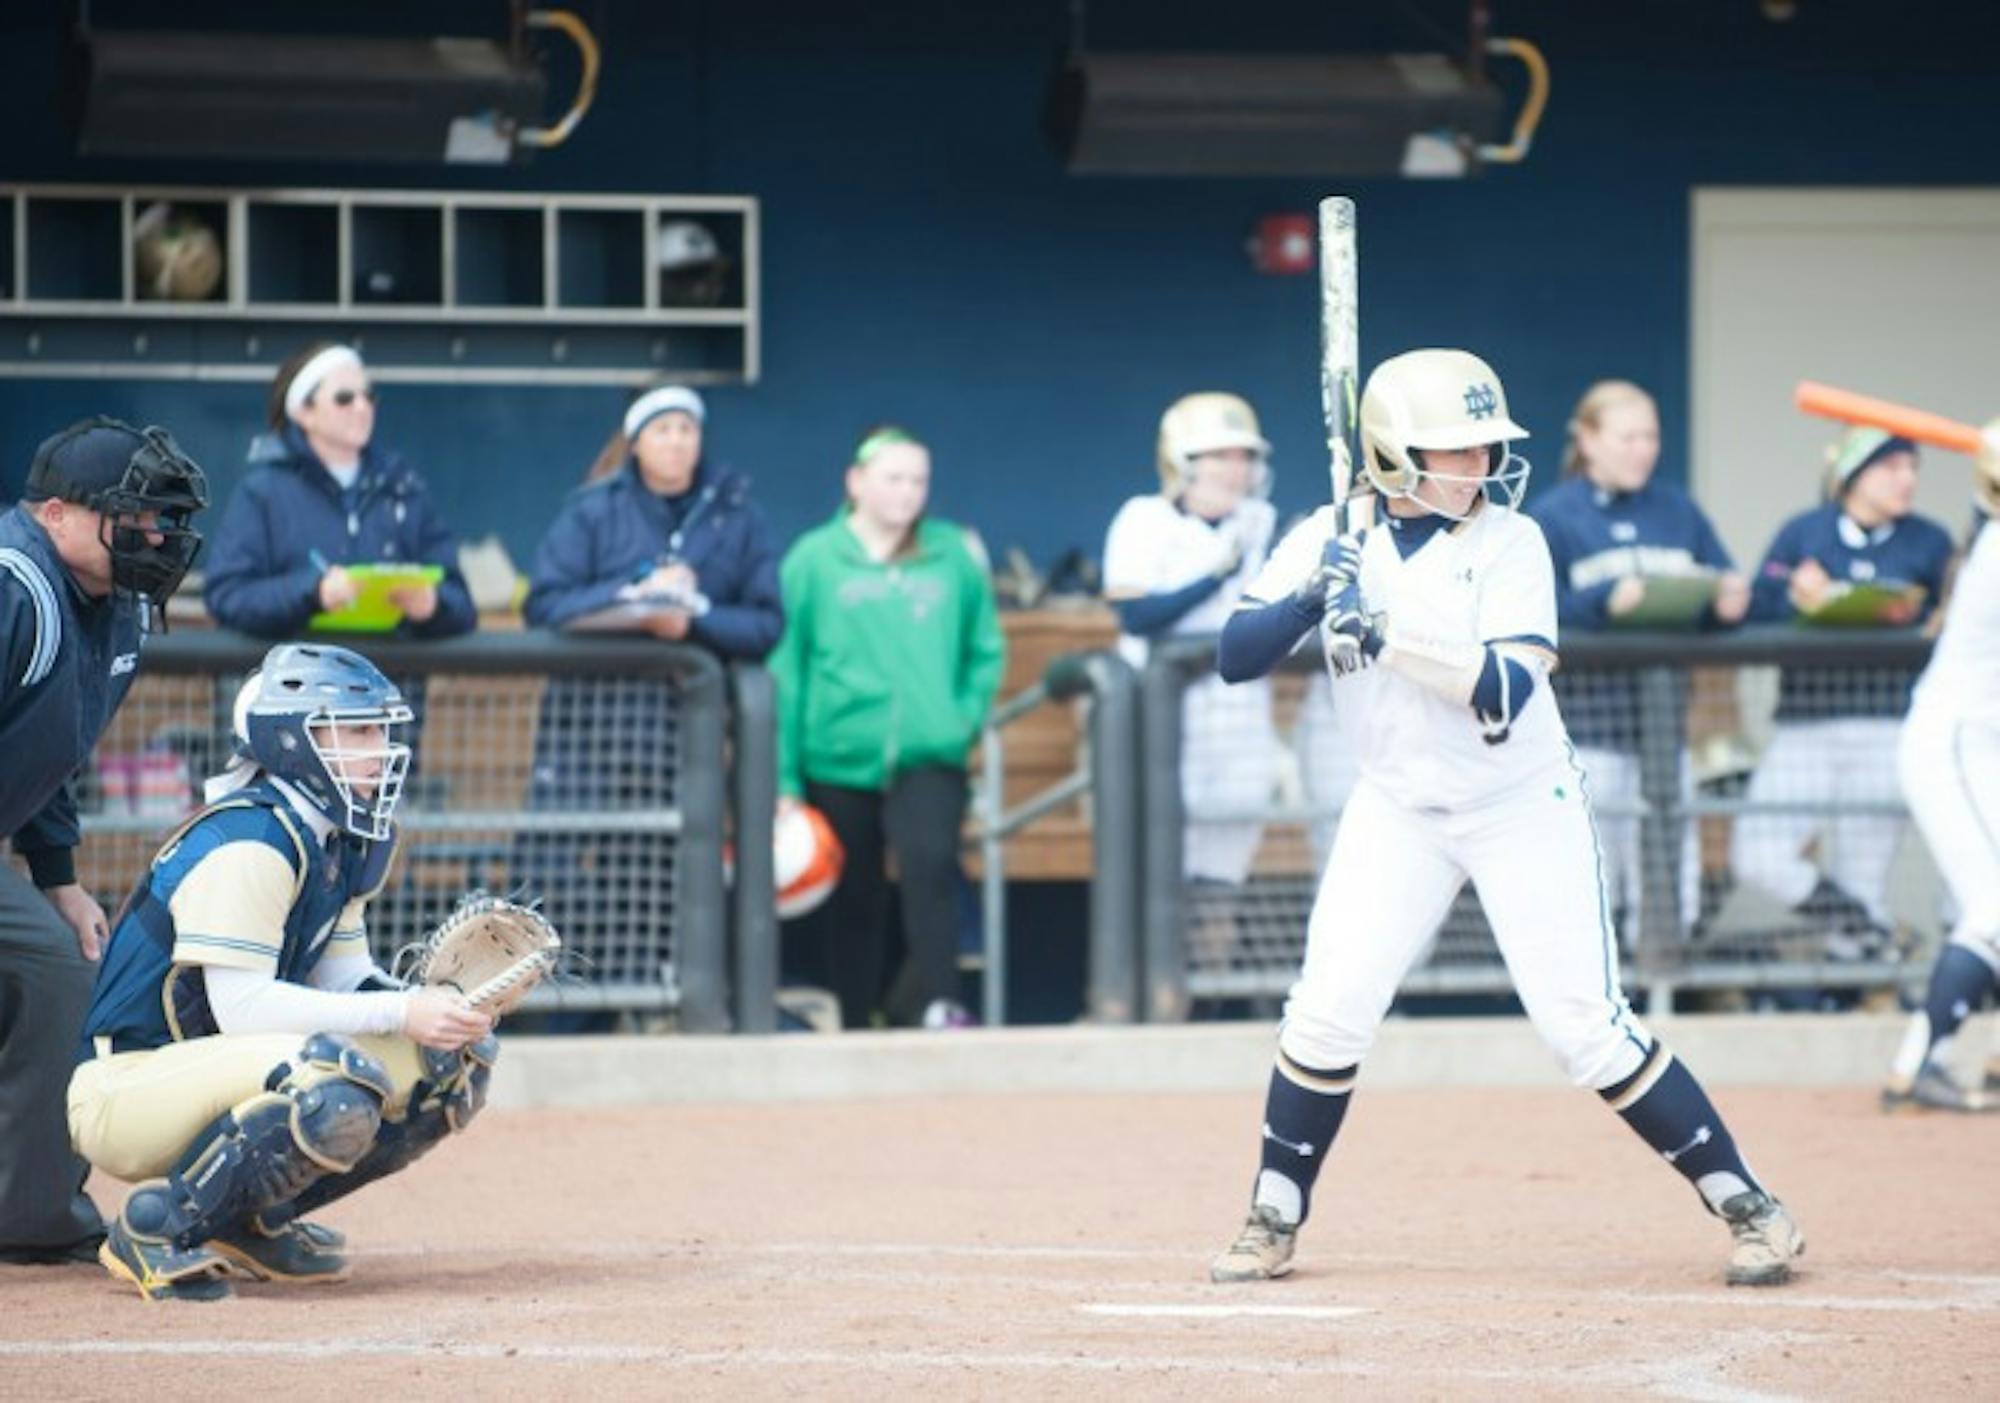 Irish senior infielder Katey Haus readies for a pitch during a win over Georgia Tech on March 21 at Melissa Cook Stadium. Haus leads the Irish with 11 home runs and 51 runs batted in this season.